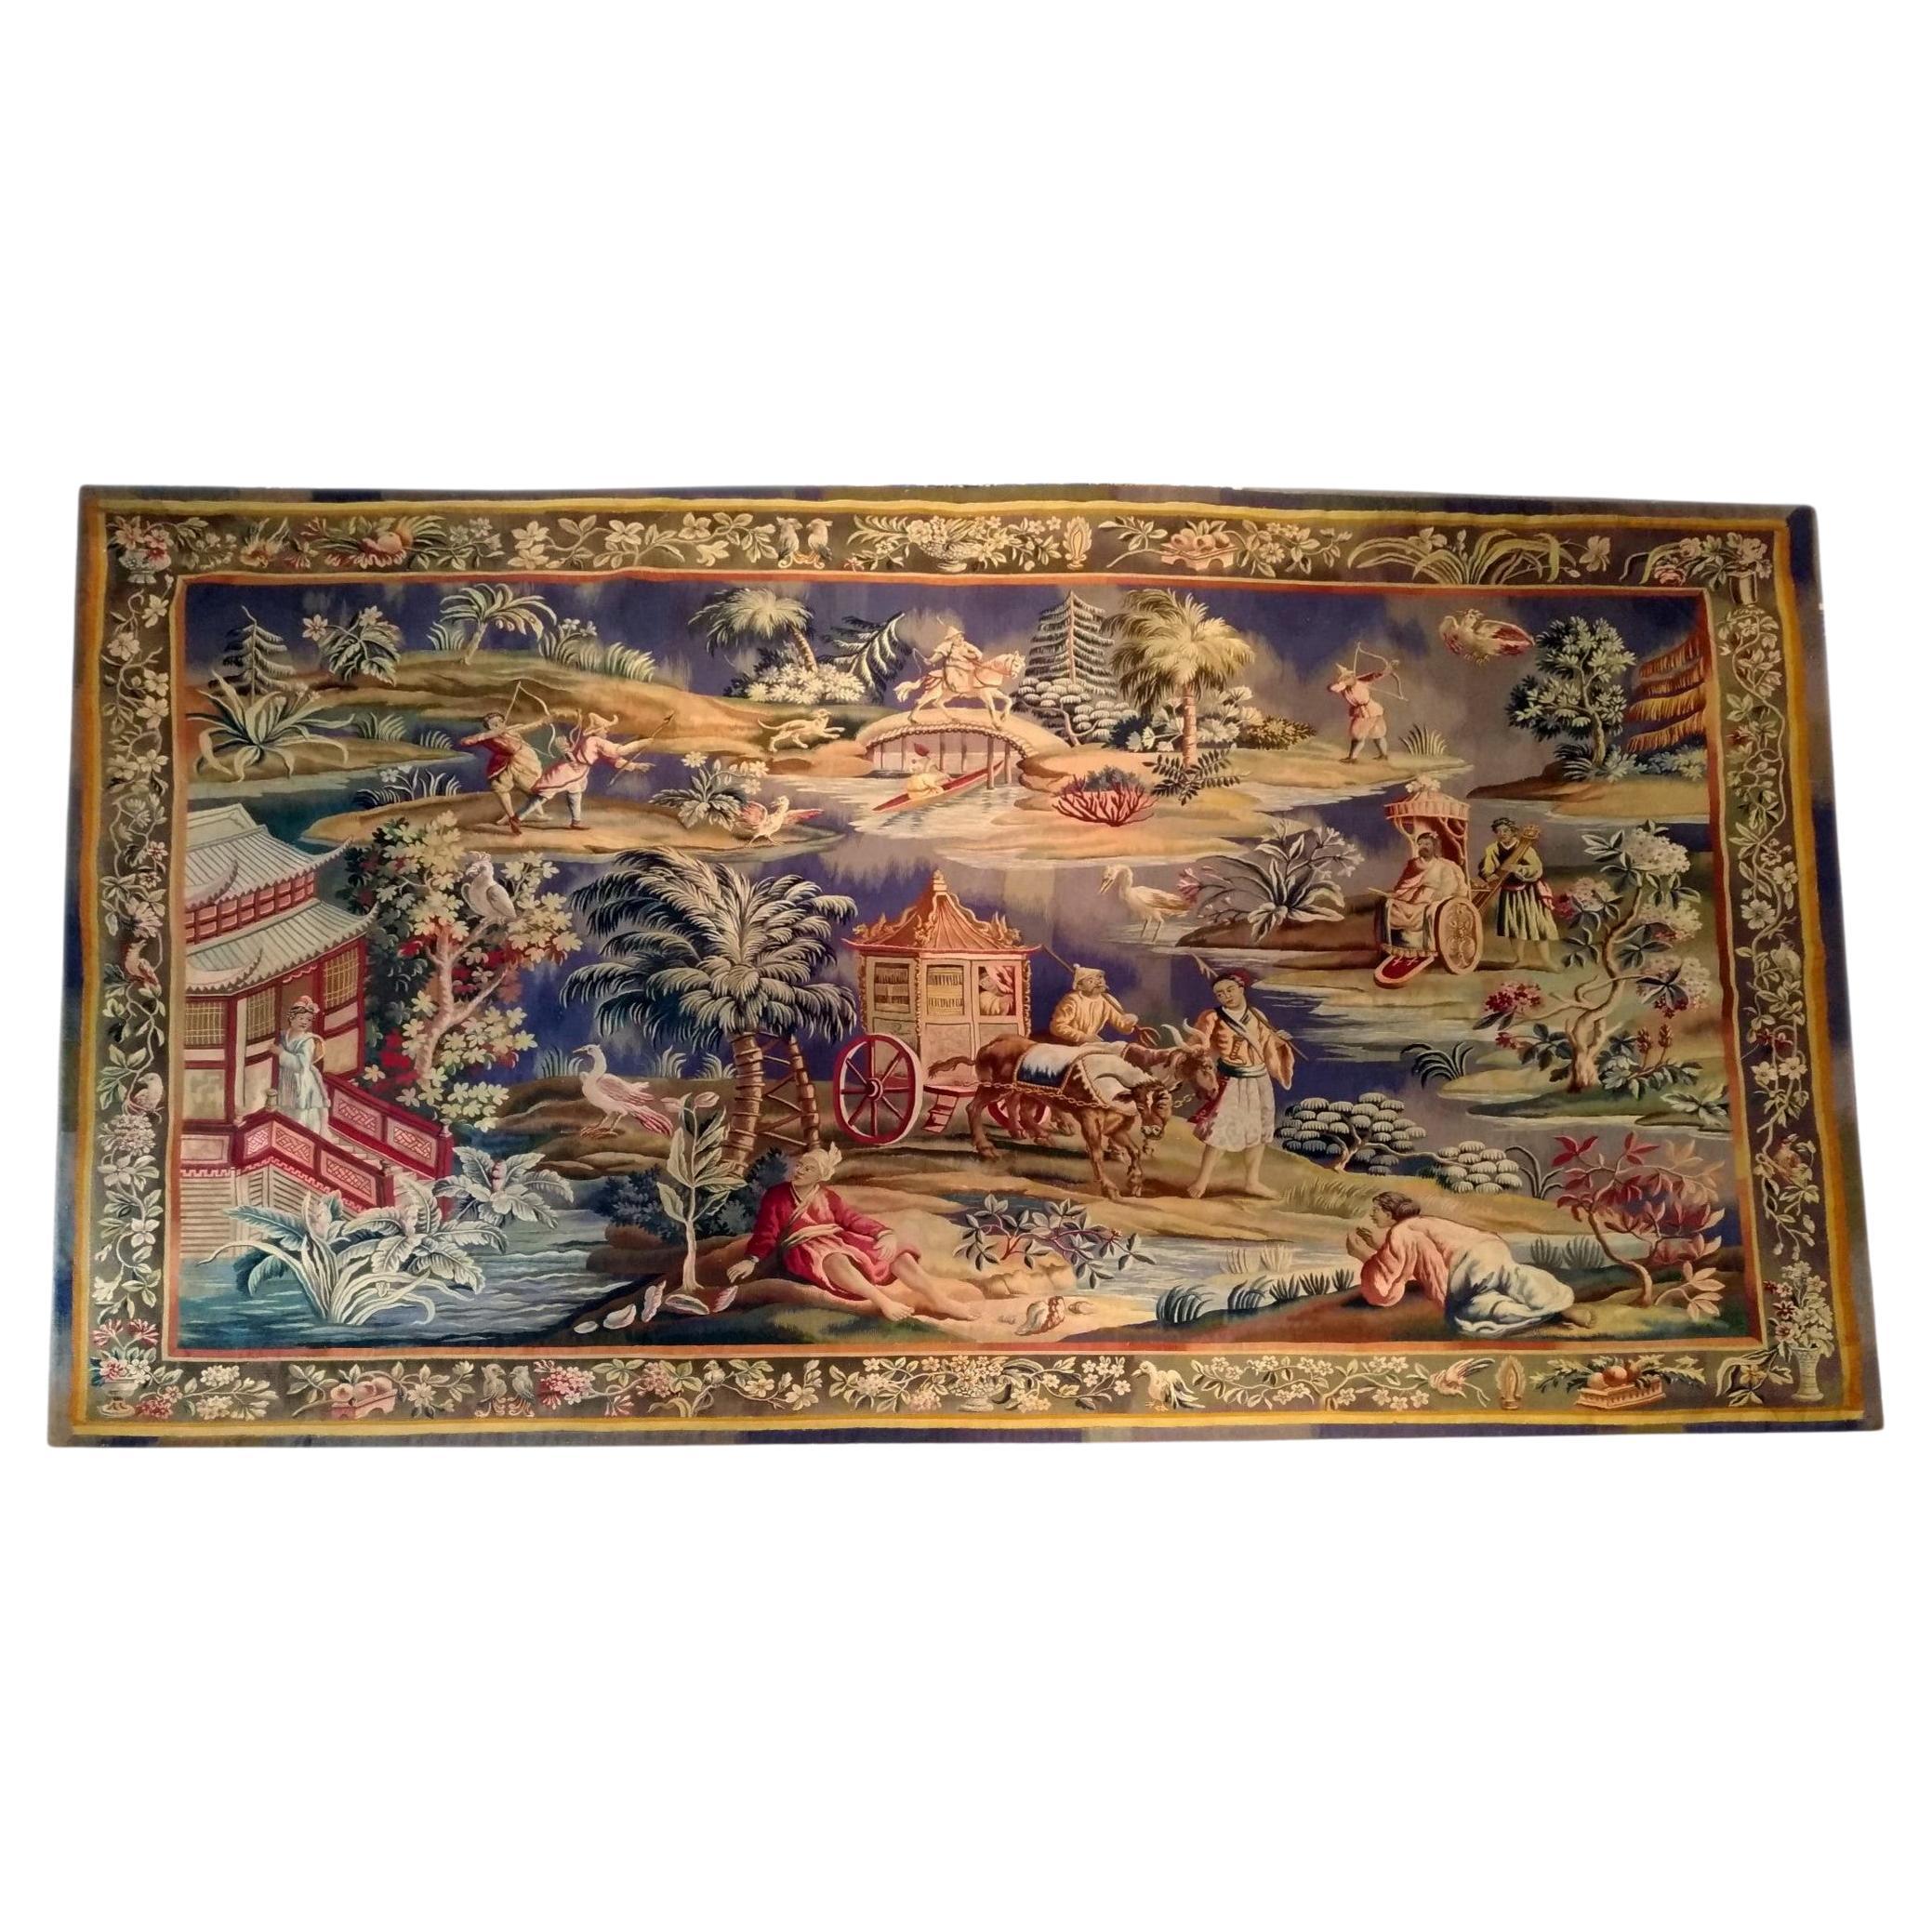 1100 - 19th Century Aubusson Tapestry 